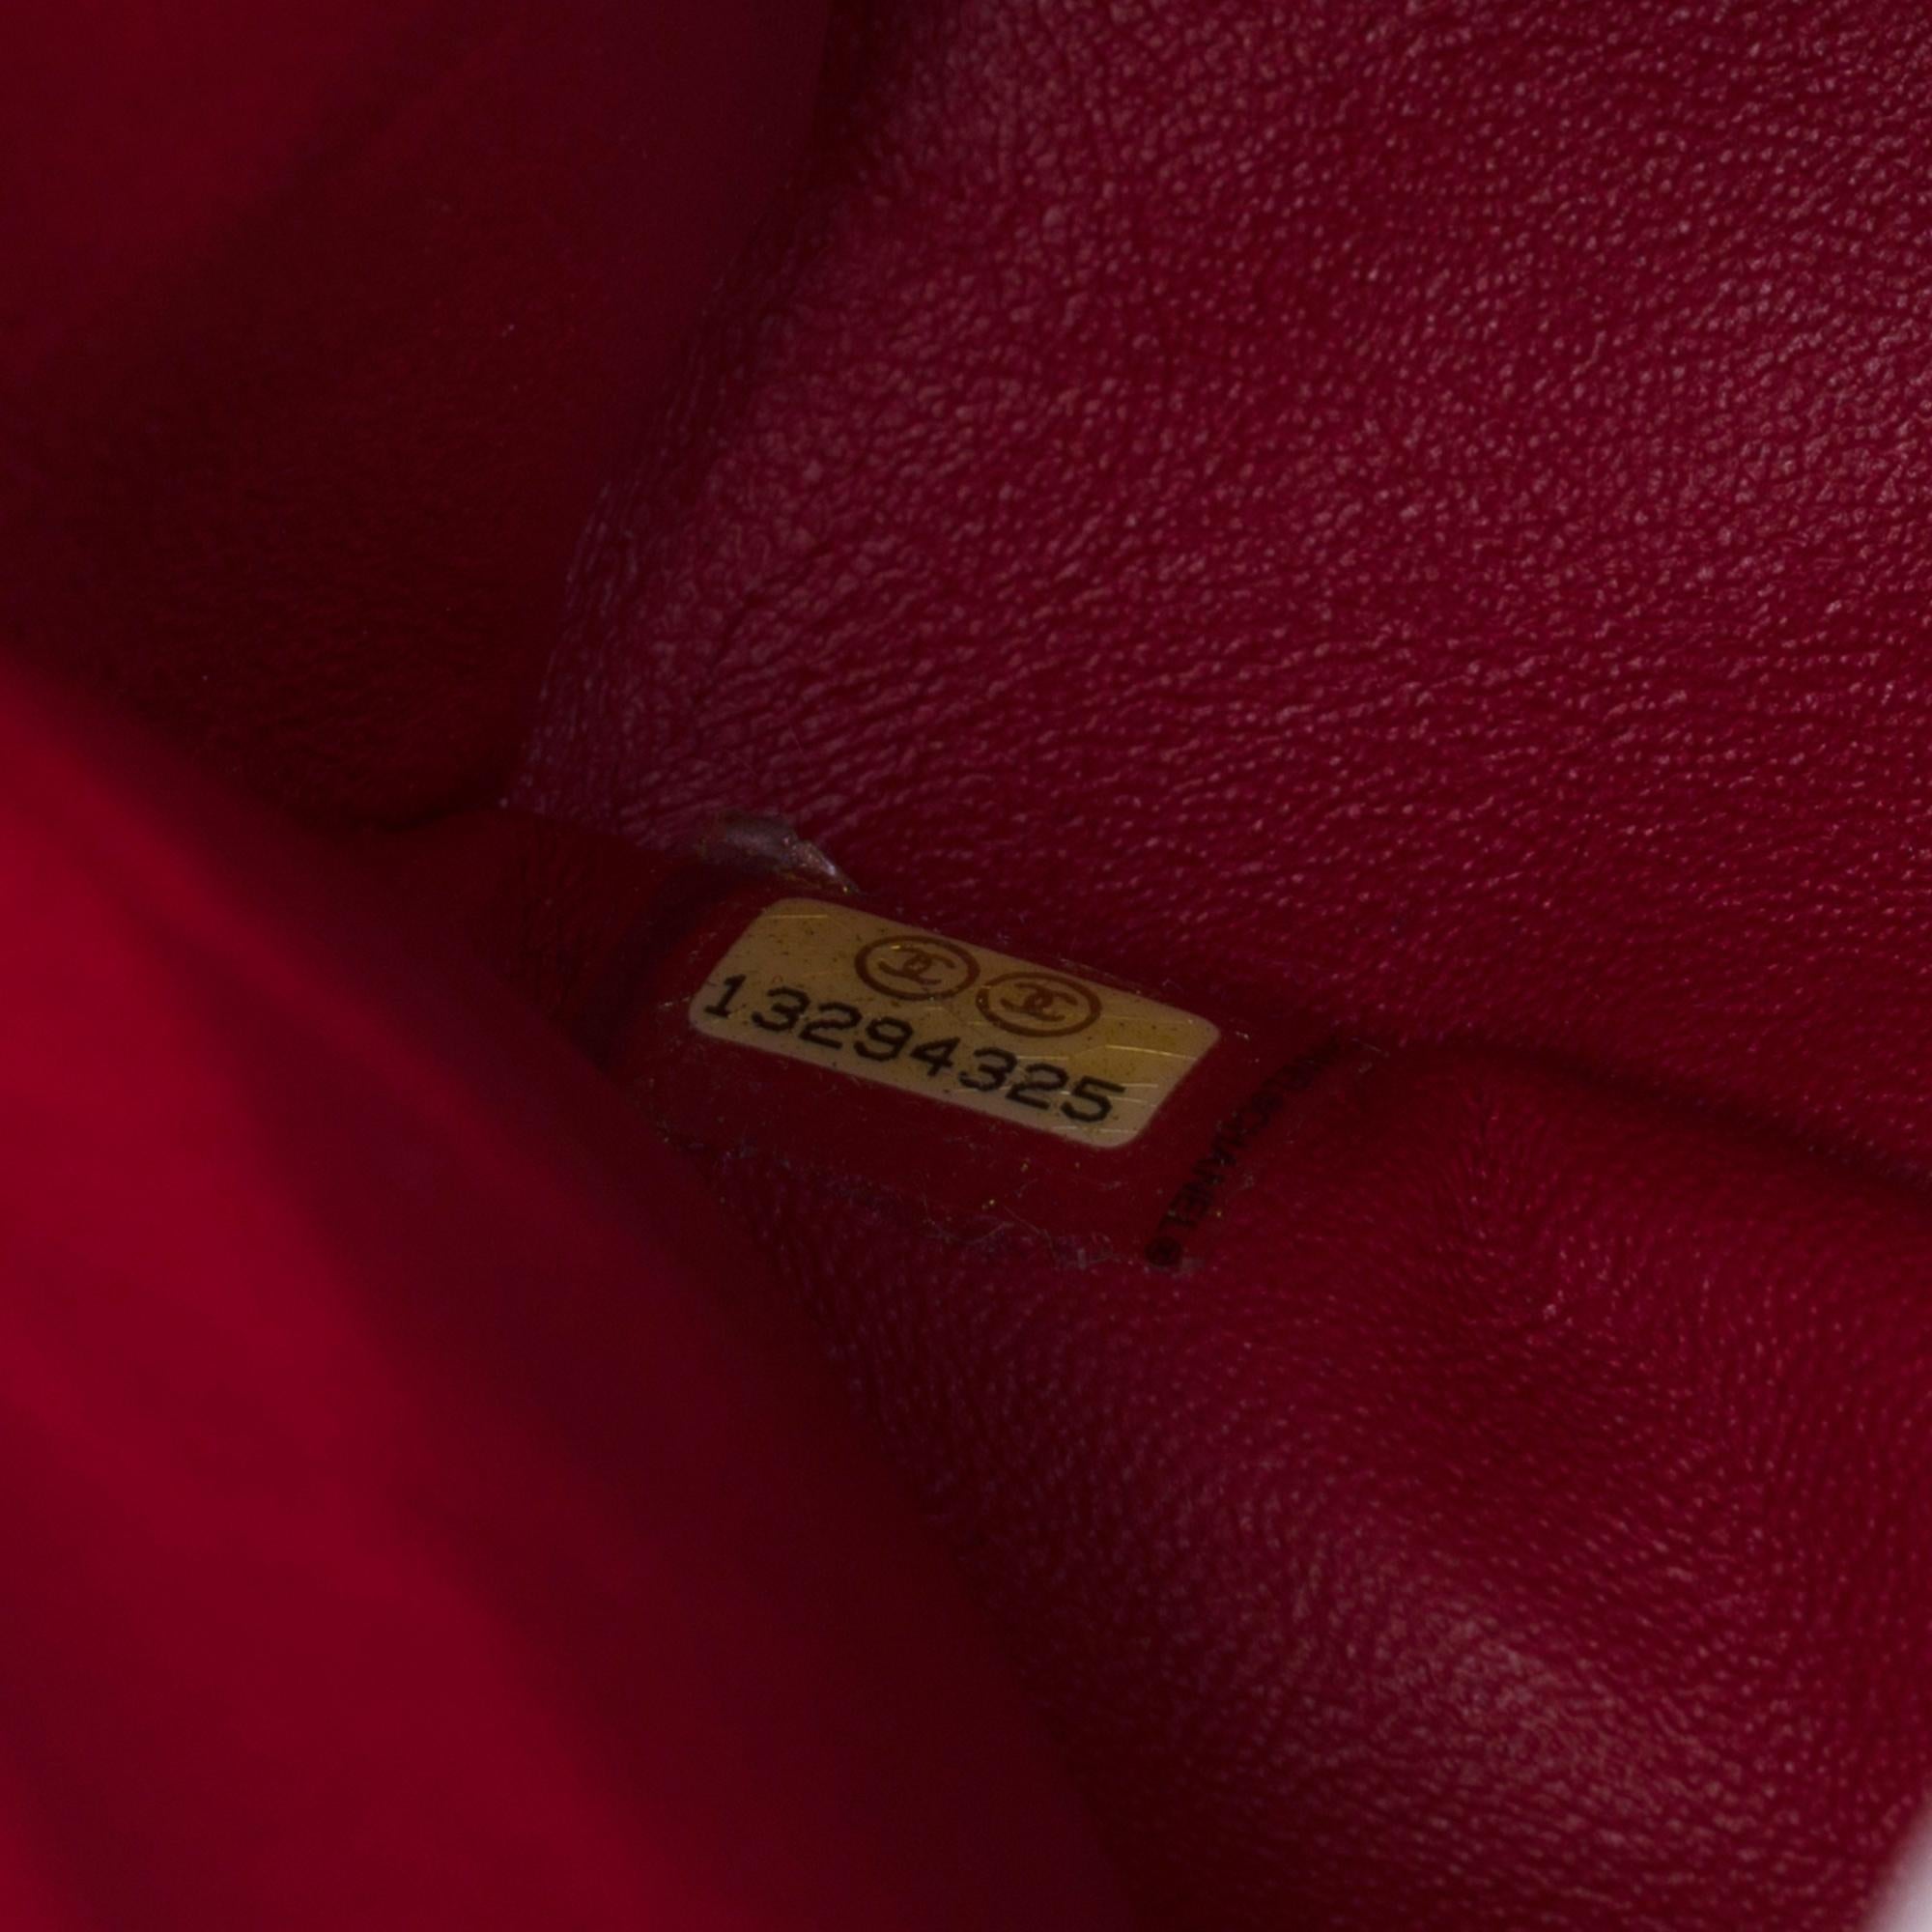 Limited Edition Chanel Timeless Shoulder bag in Red & White Tweed, SHW 1